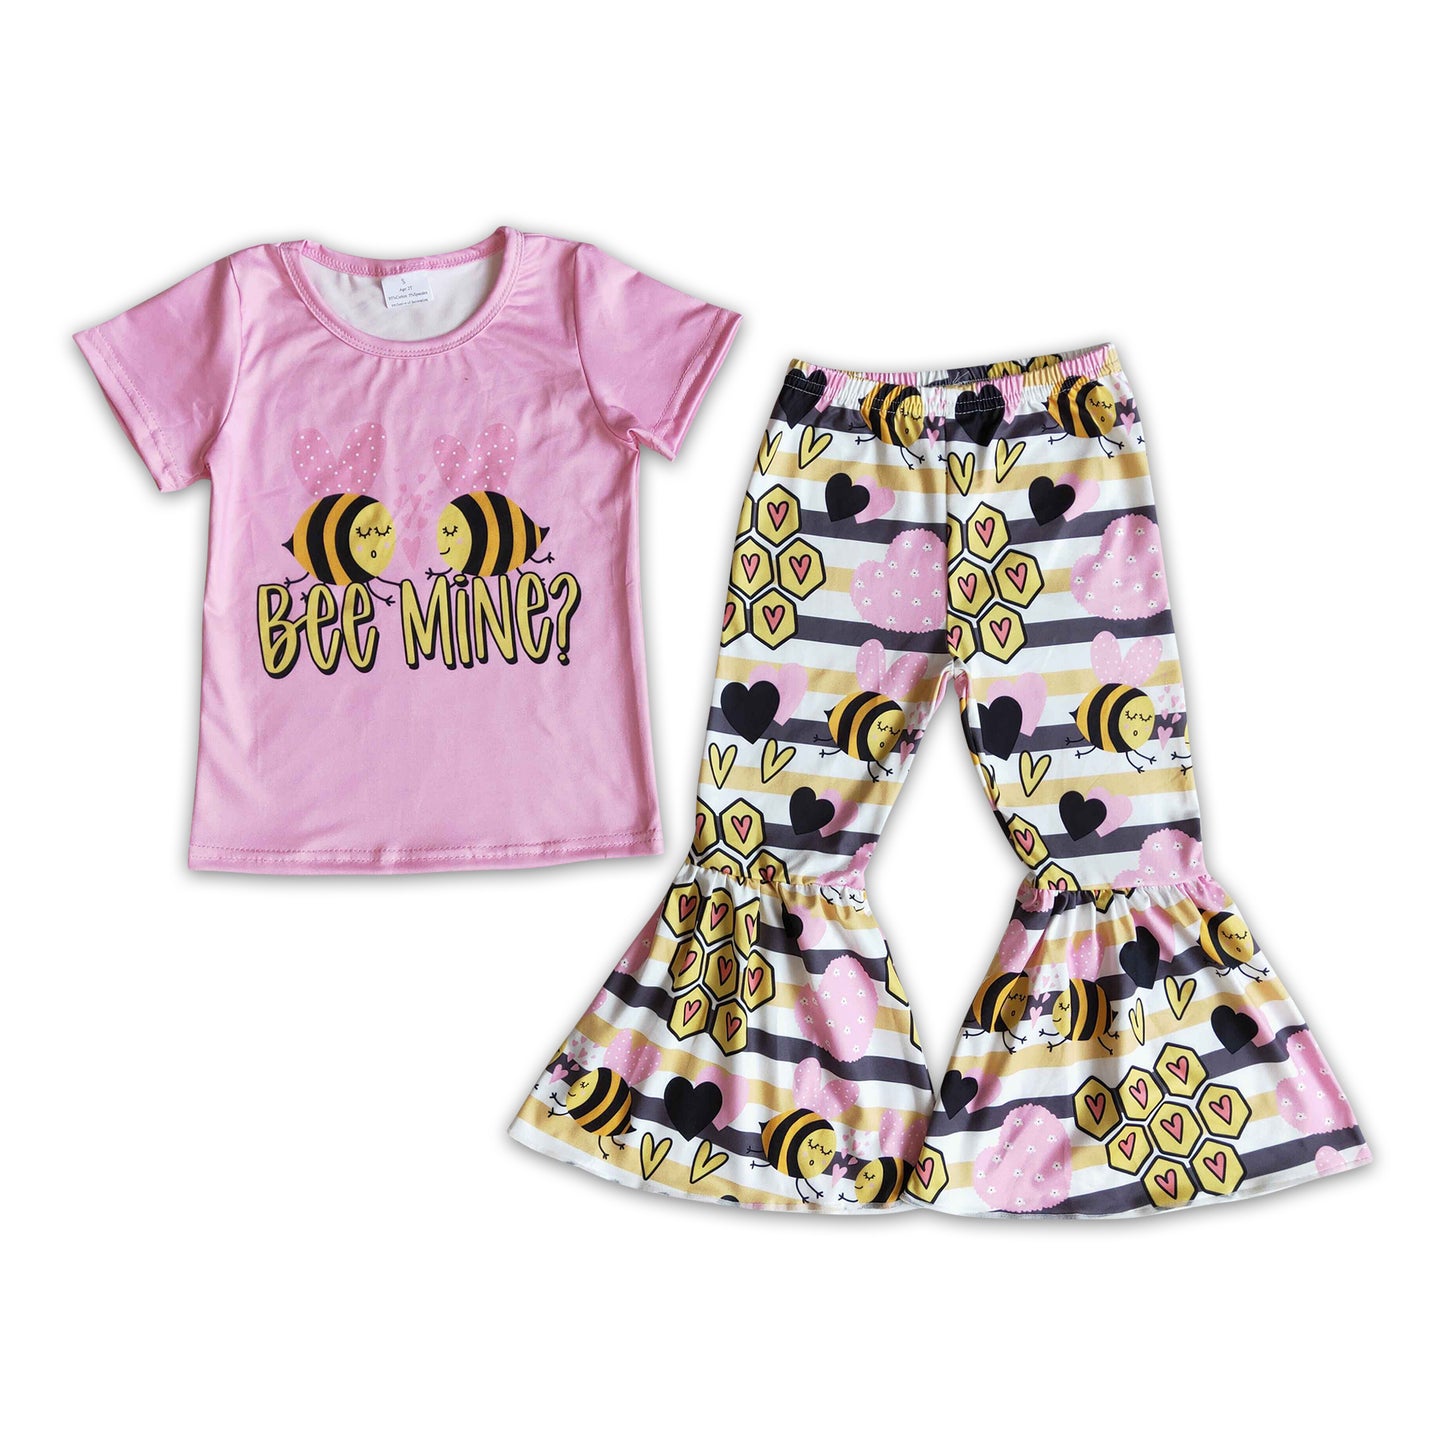 Bee mine pink short sleeve shirt pants girls valentine's day outfits